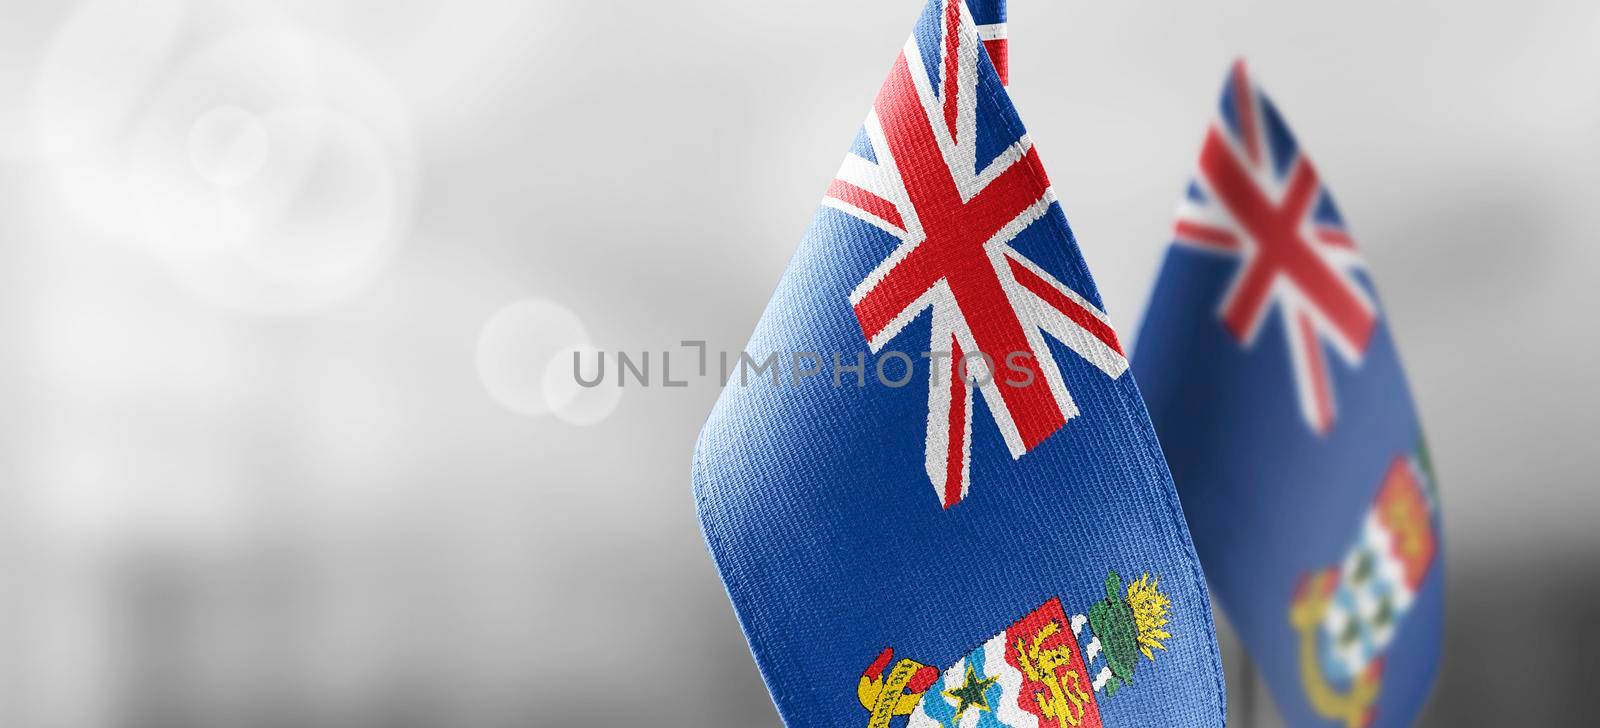 Patch of the national flag of the Cayman Islands on a white t-shirt.